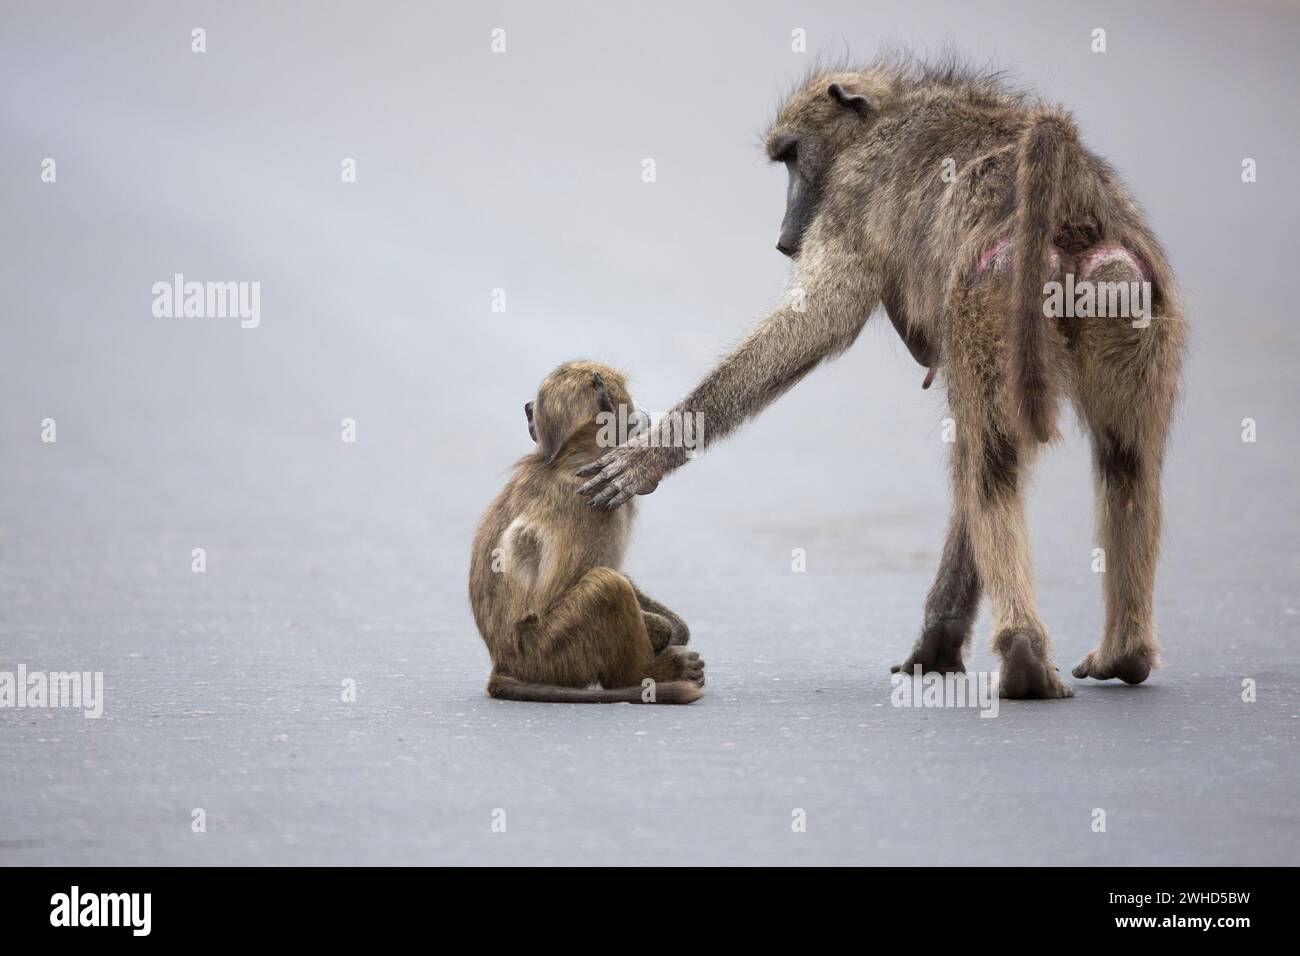 Africa, young animal, Chacma baboon (Papio ursinus), Kruger National Park, South Africa, Limpopo Province, South Africa, wildlife, tourism, nature, bush, daytime, no people, outdoors, safari, young animals, cute, animals in the wild, playing, Humour Stock Photo